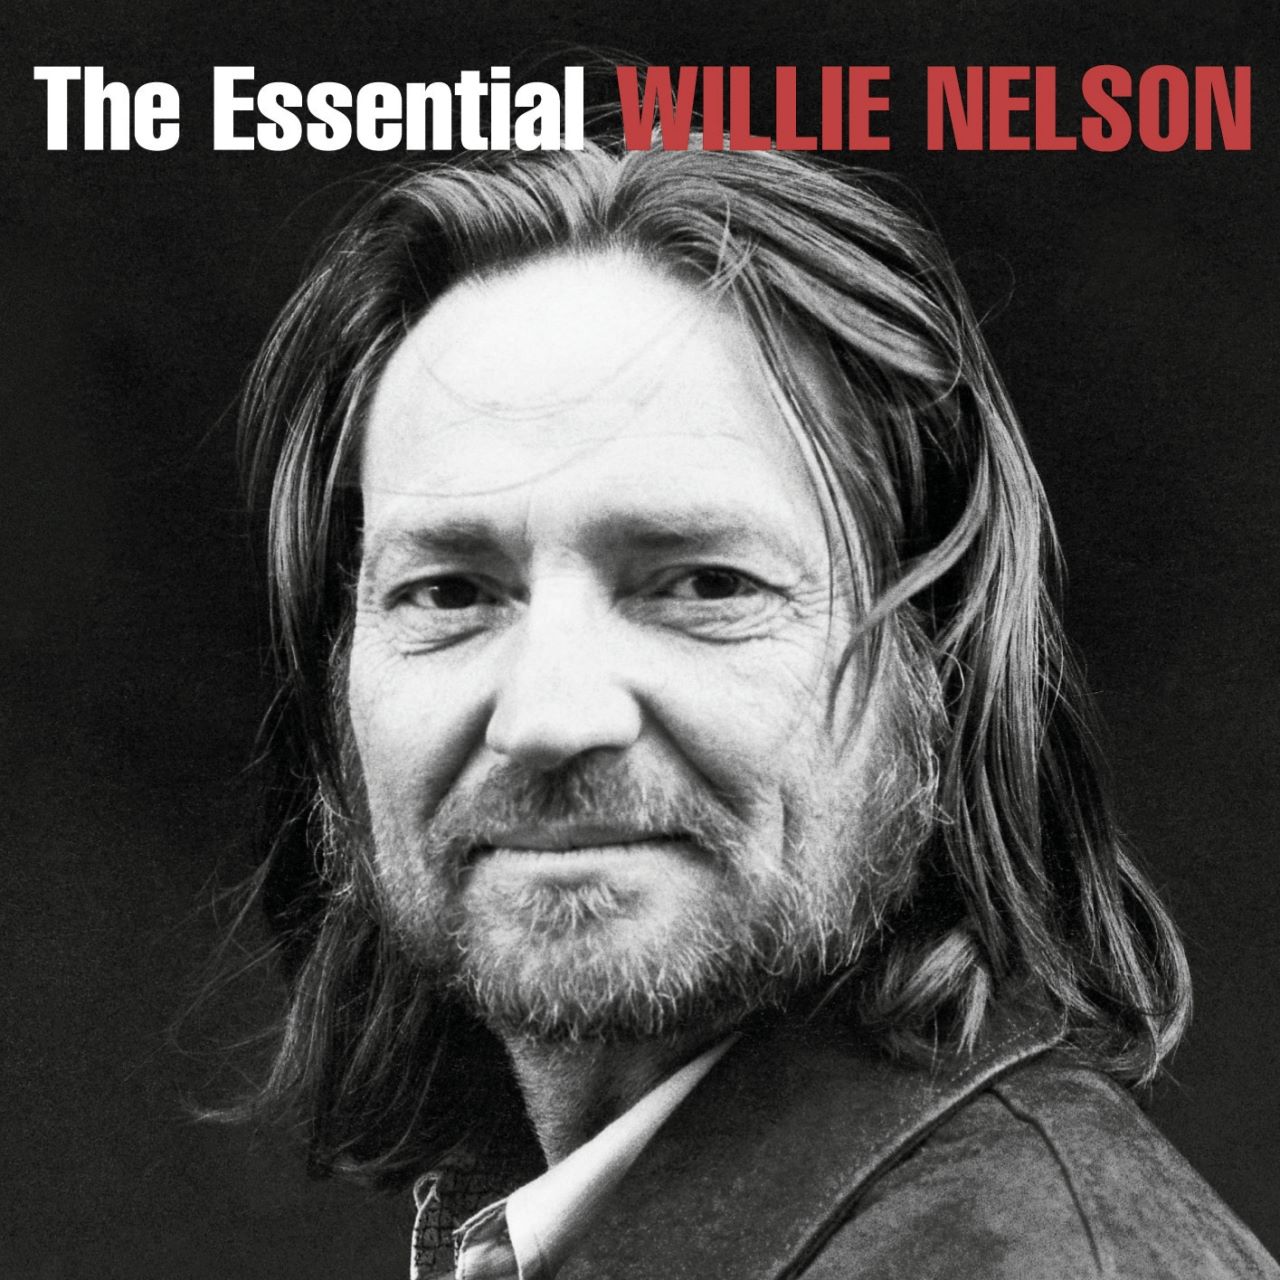 Willie Nelson – The Essential cover album